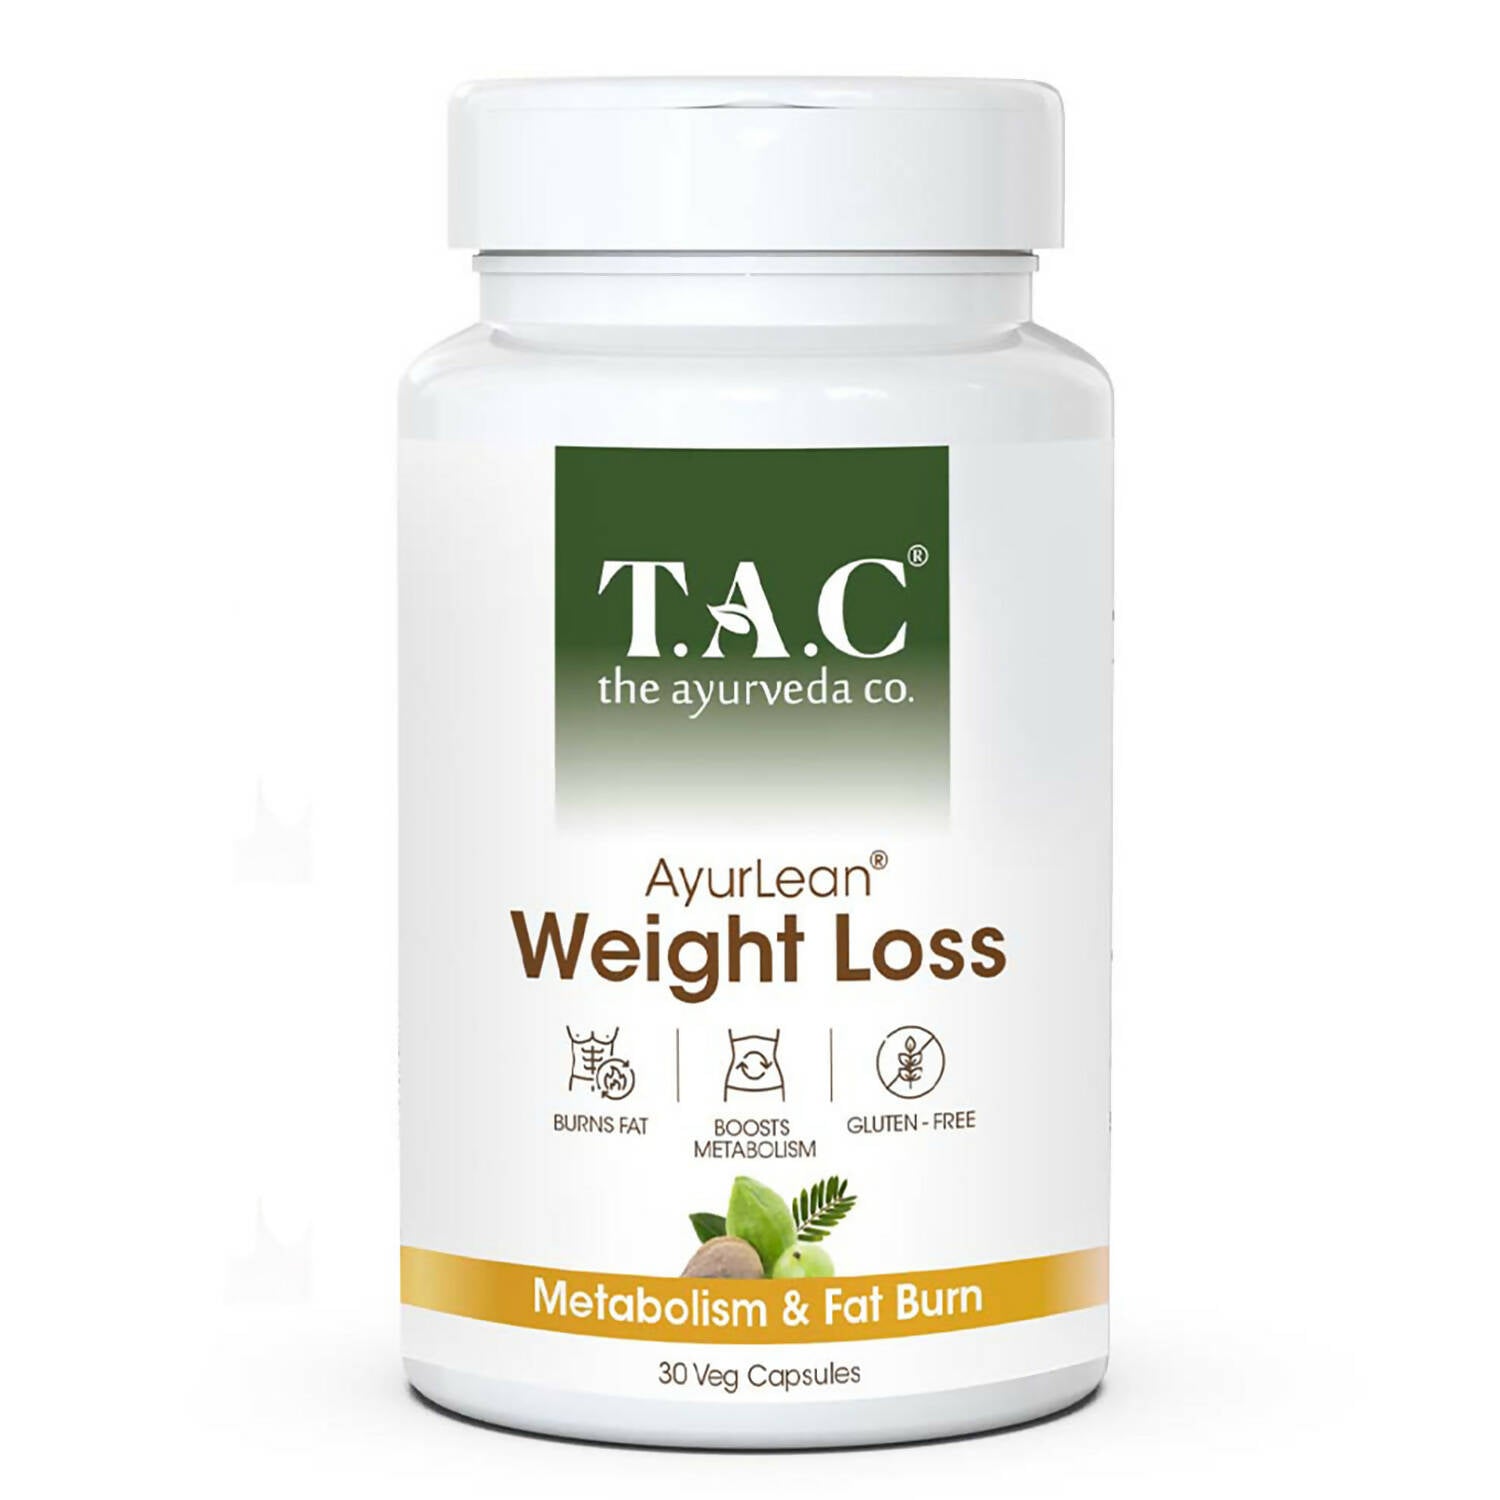 TAC - The Ayurveda Co. AyurLean Weight Loss Veg Capsules - BUDEN